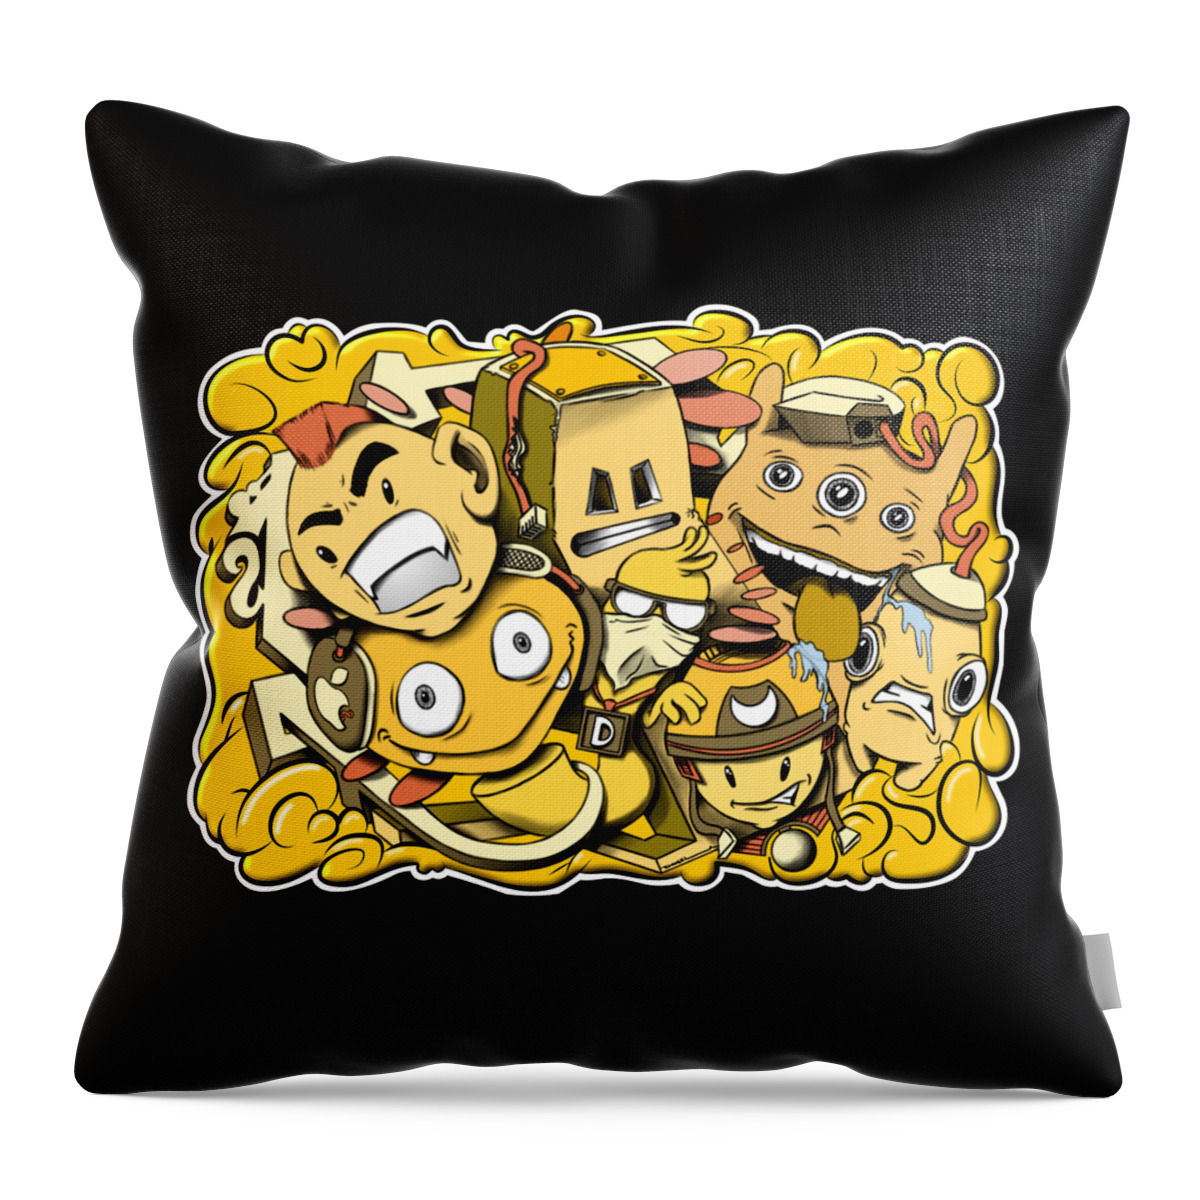 Copic Throw Pillow featuring the digital art Yellow graffiti cartoon characters by Donald Lawrence